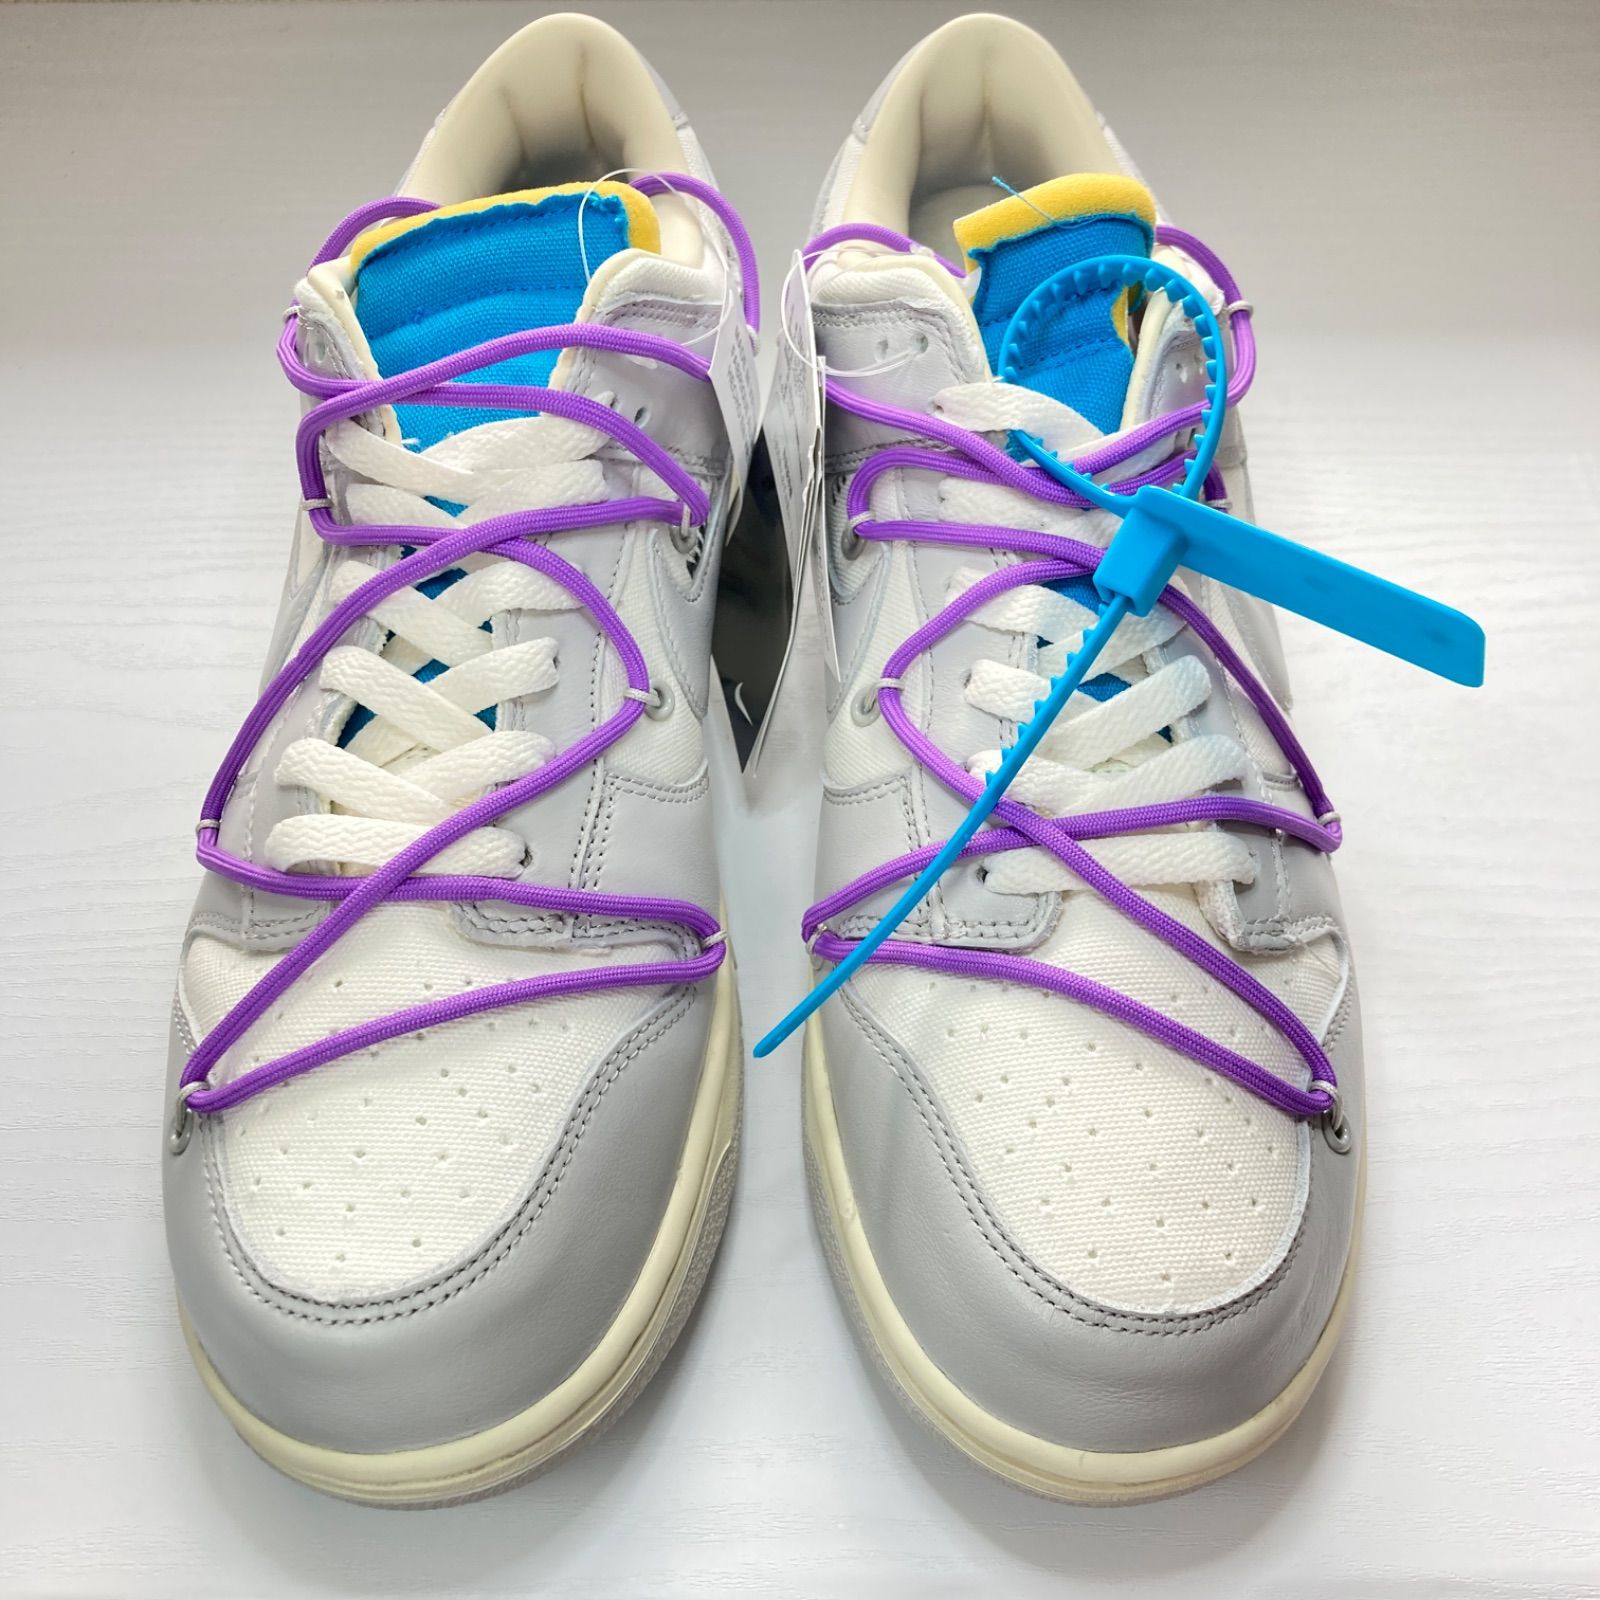 OFF-WHITE Nike Dunk Low 1 of 50 “47” 【フォロー10%OFF】